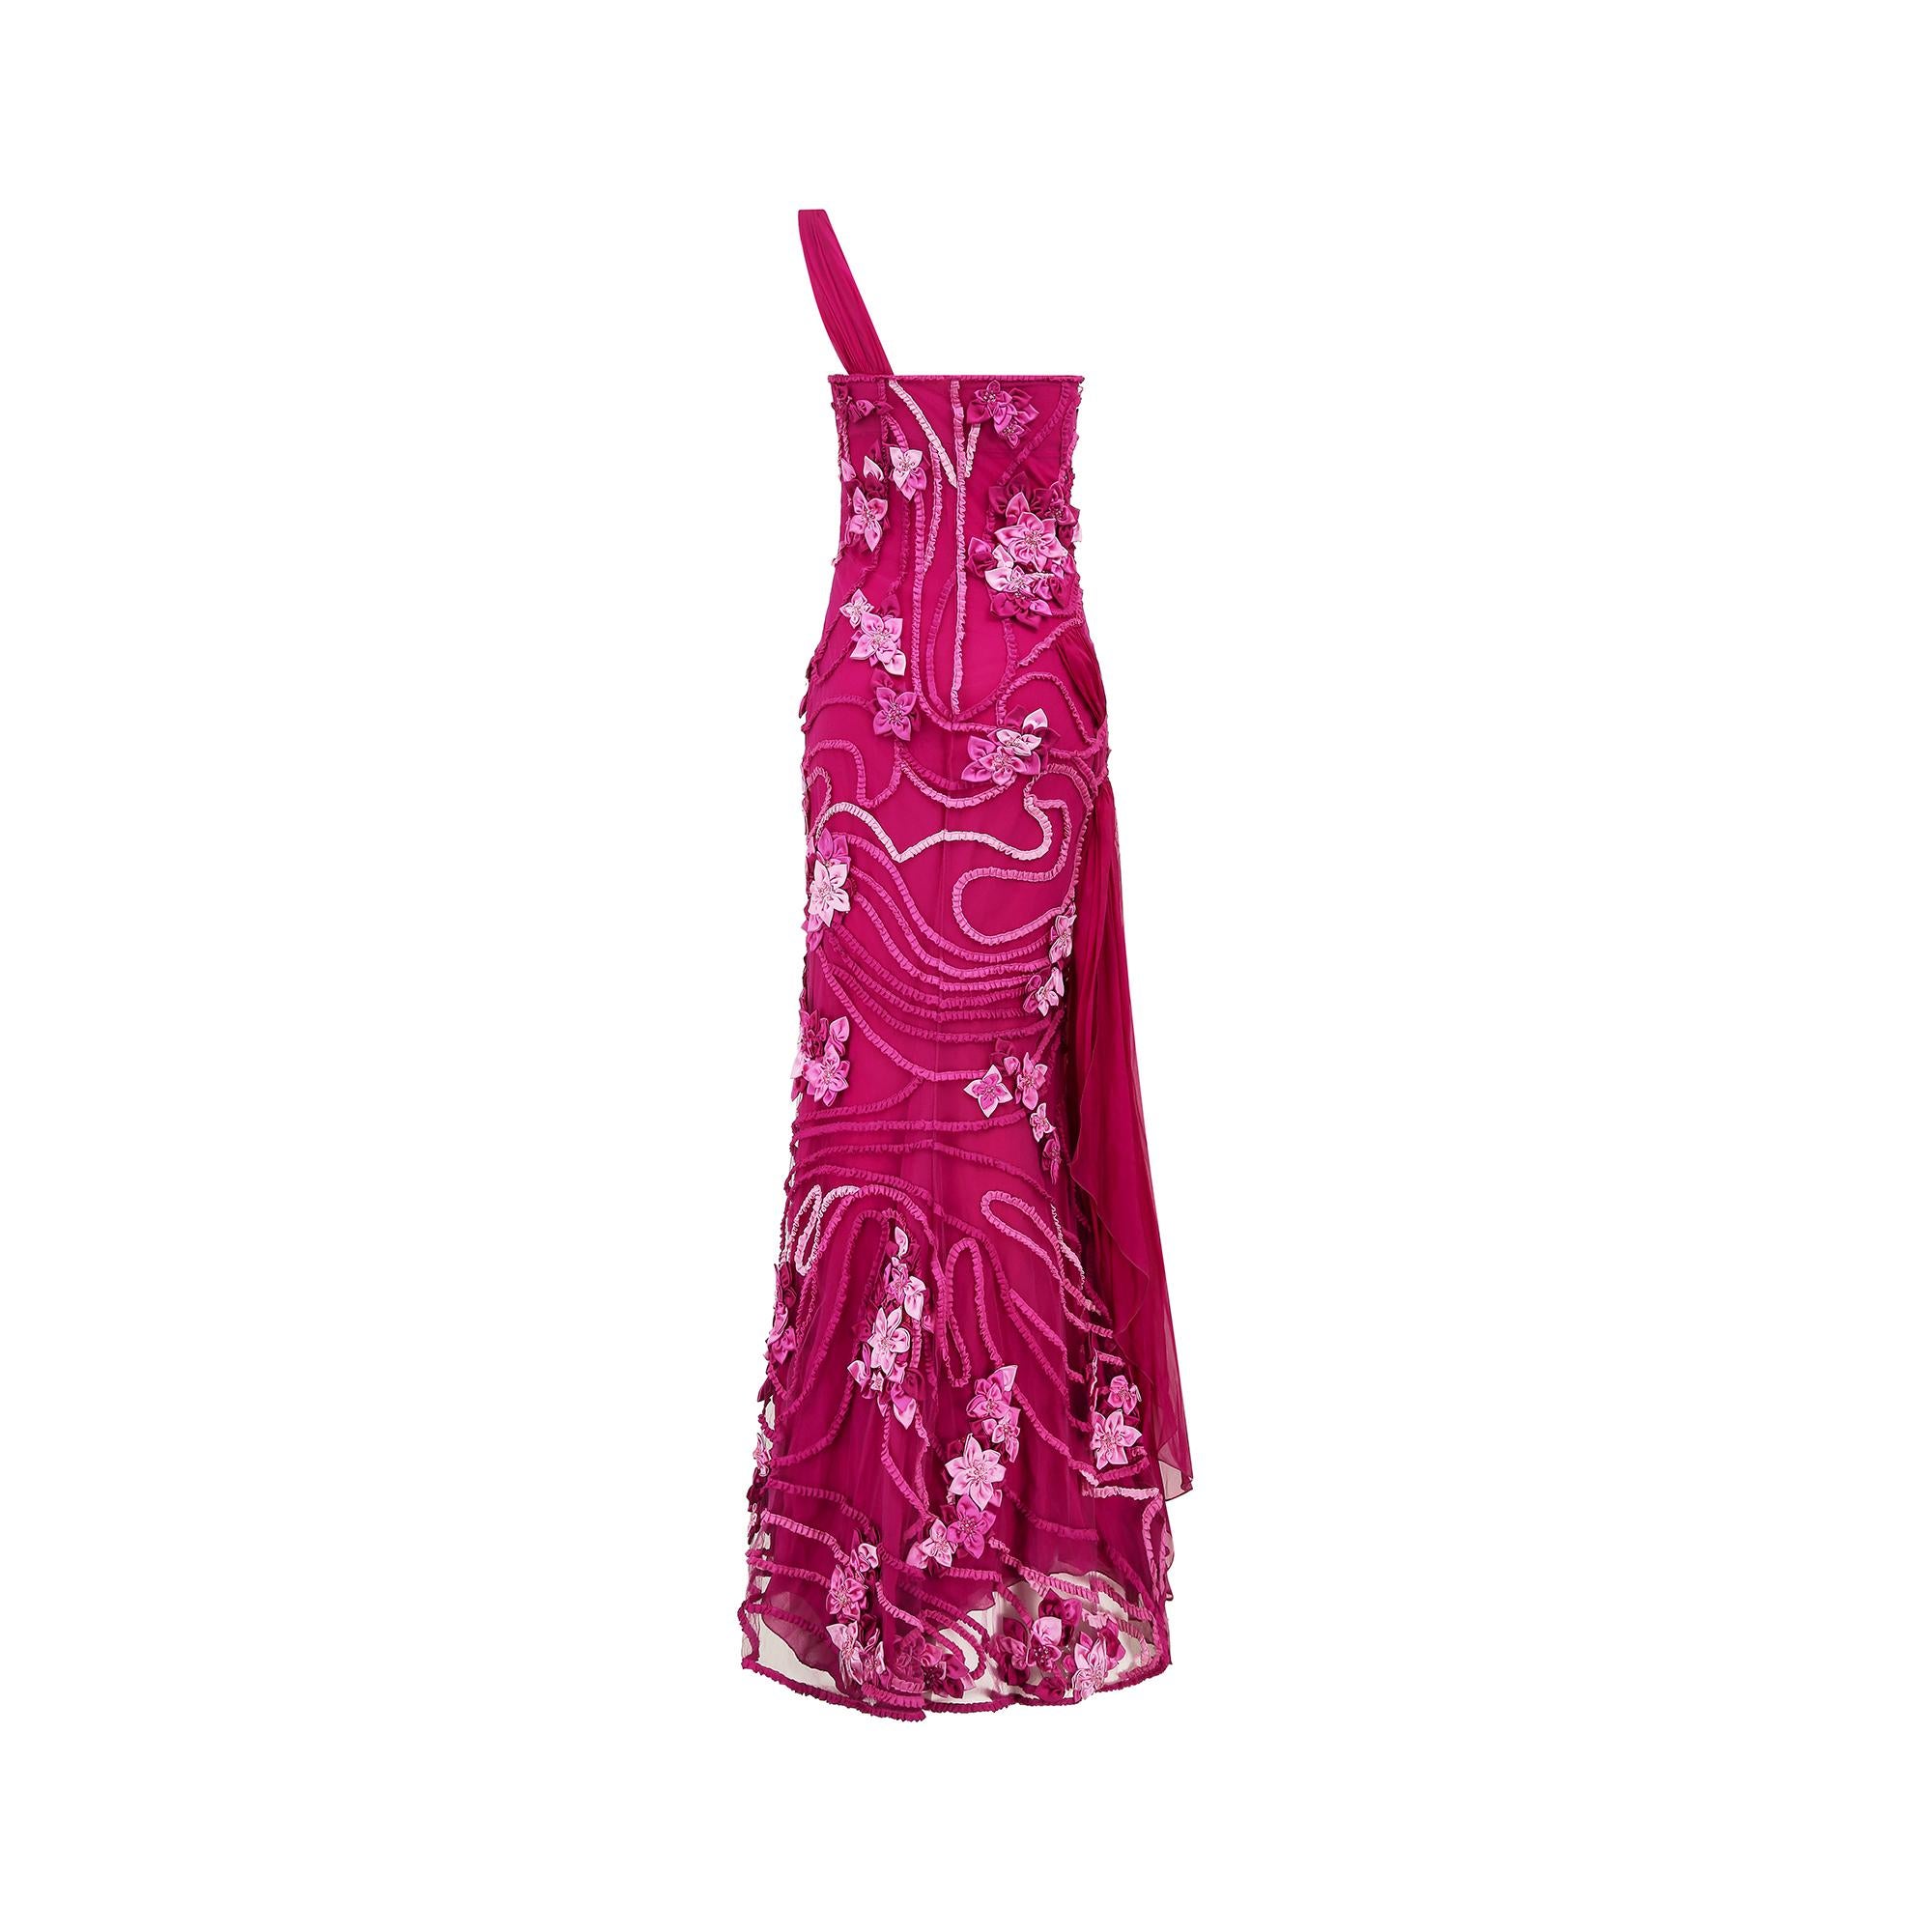 1990s Valentino Pink Couture Applique Evening Dress In Excellent Condition For Sale In London, GB